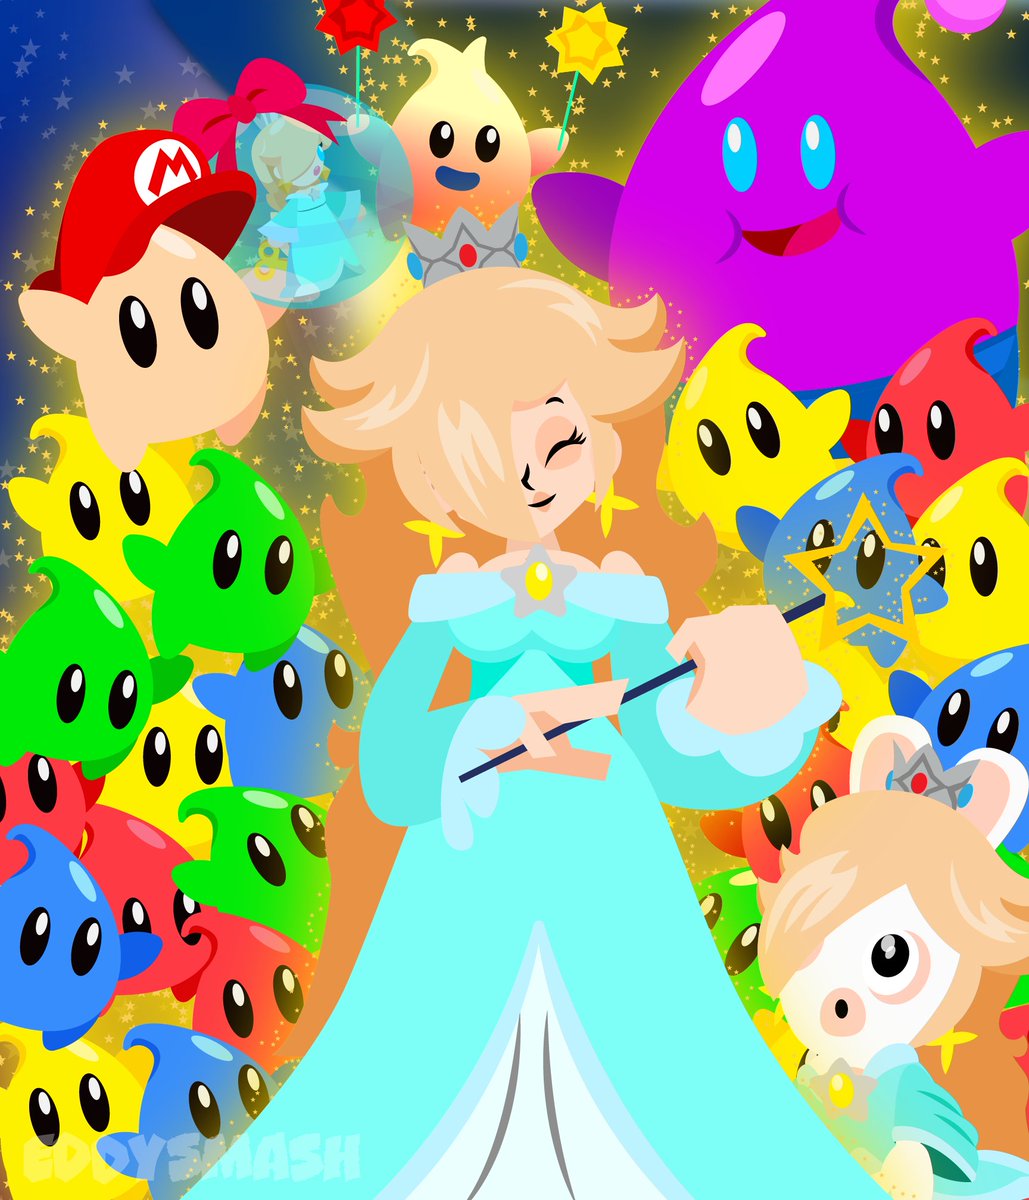 Rosalina, protector of the galaxy and of her family!! 🌠🌟🌌
(Super Mario Galaxy) Happy Mother's Day!!

#Rosalina #PrincessRosalina #SuperMario #SuperMarioGalaxy